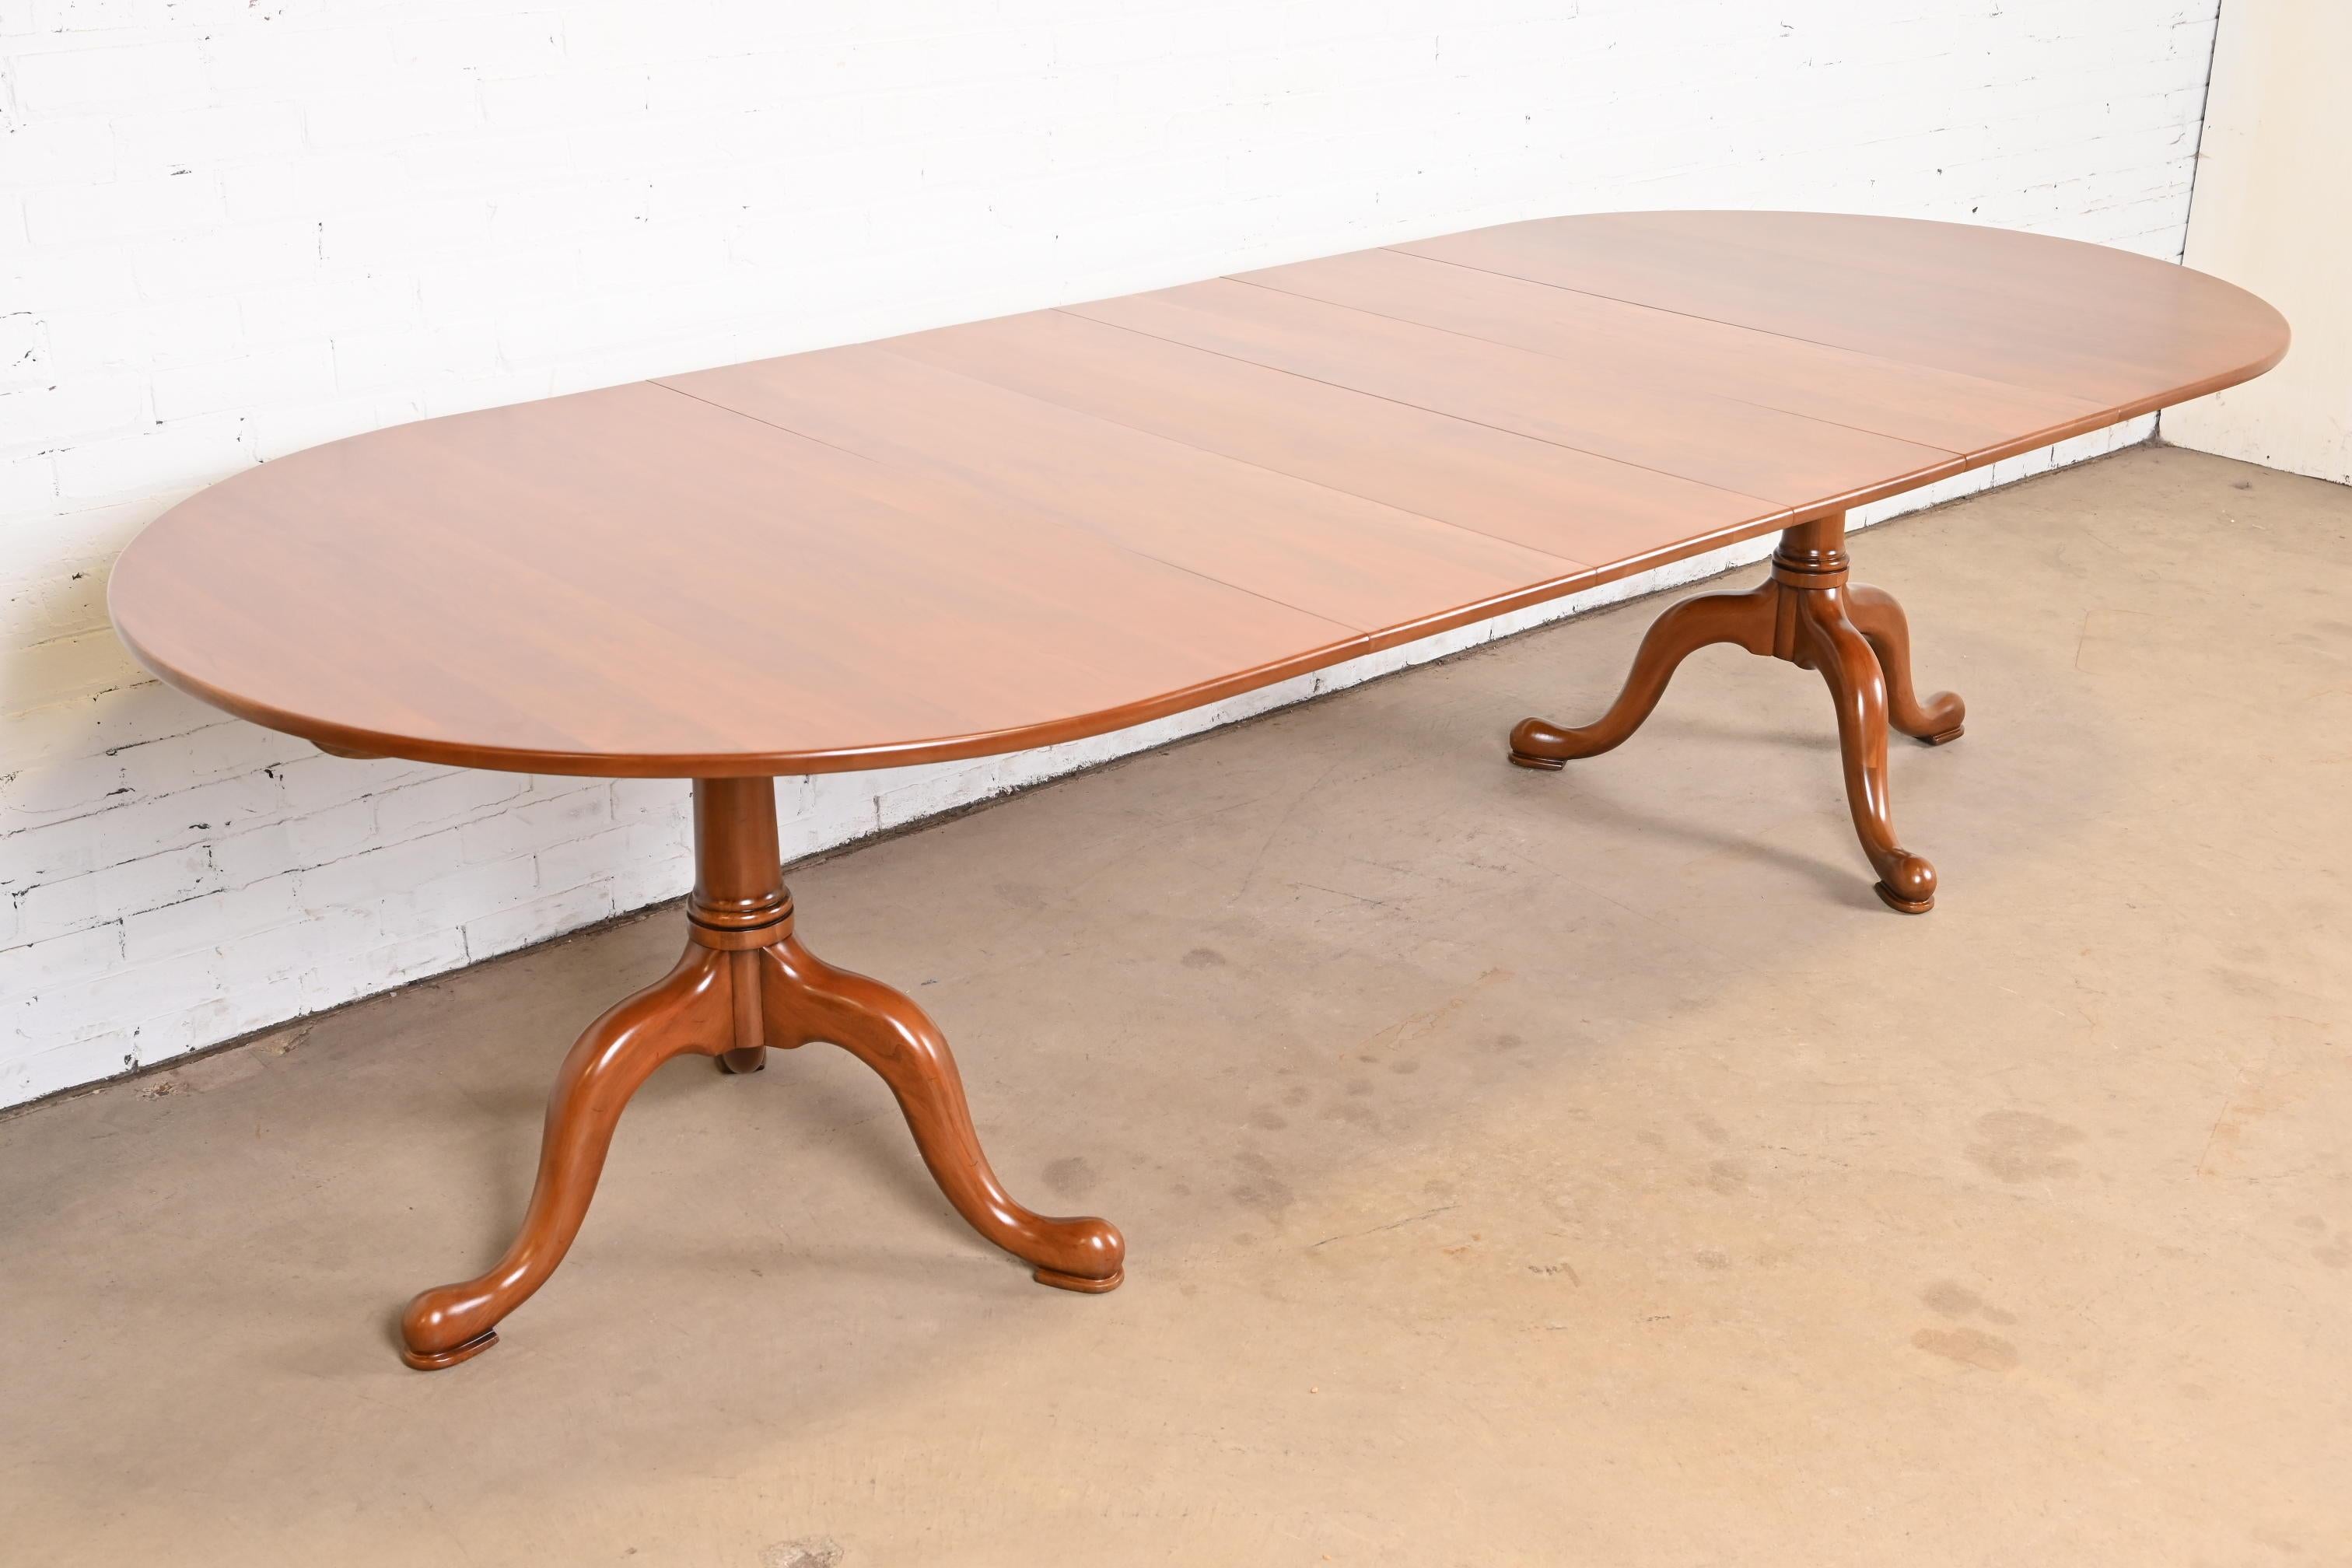 Mid-20th Century Henkel Harris Georgian Solid Cherry Wood Double Pedestal Extension Dining Table For Sale